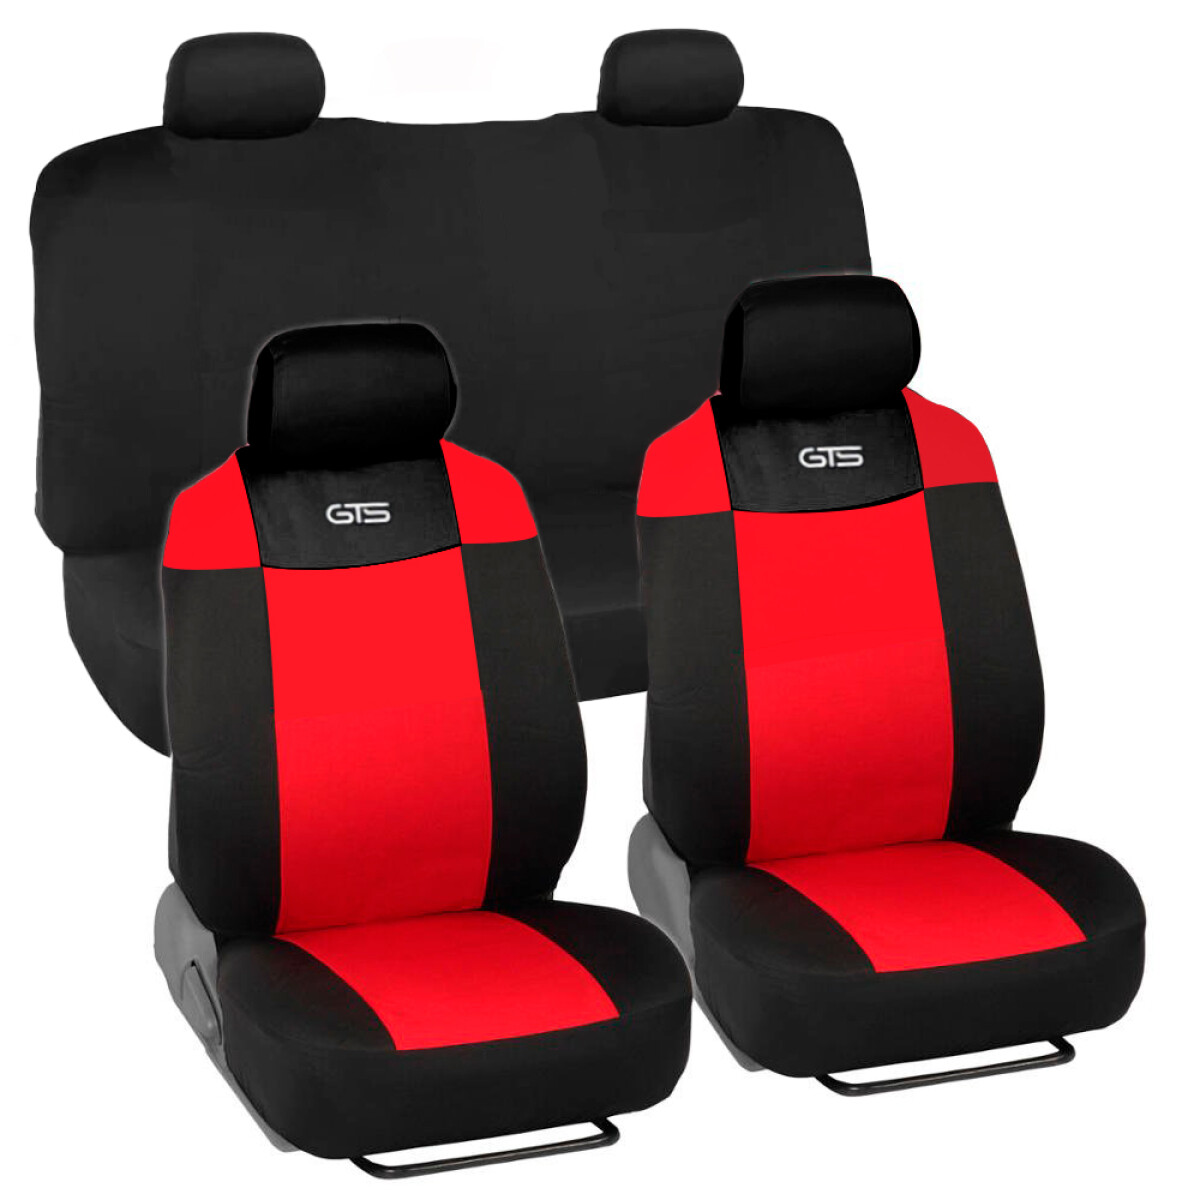 CUBRE ASIENTO - 055 NEGRO ROJO POLYESTER GTS 